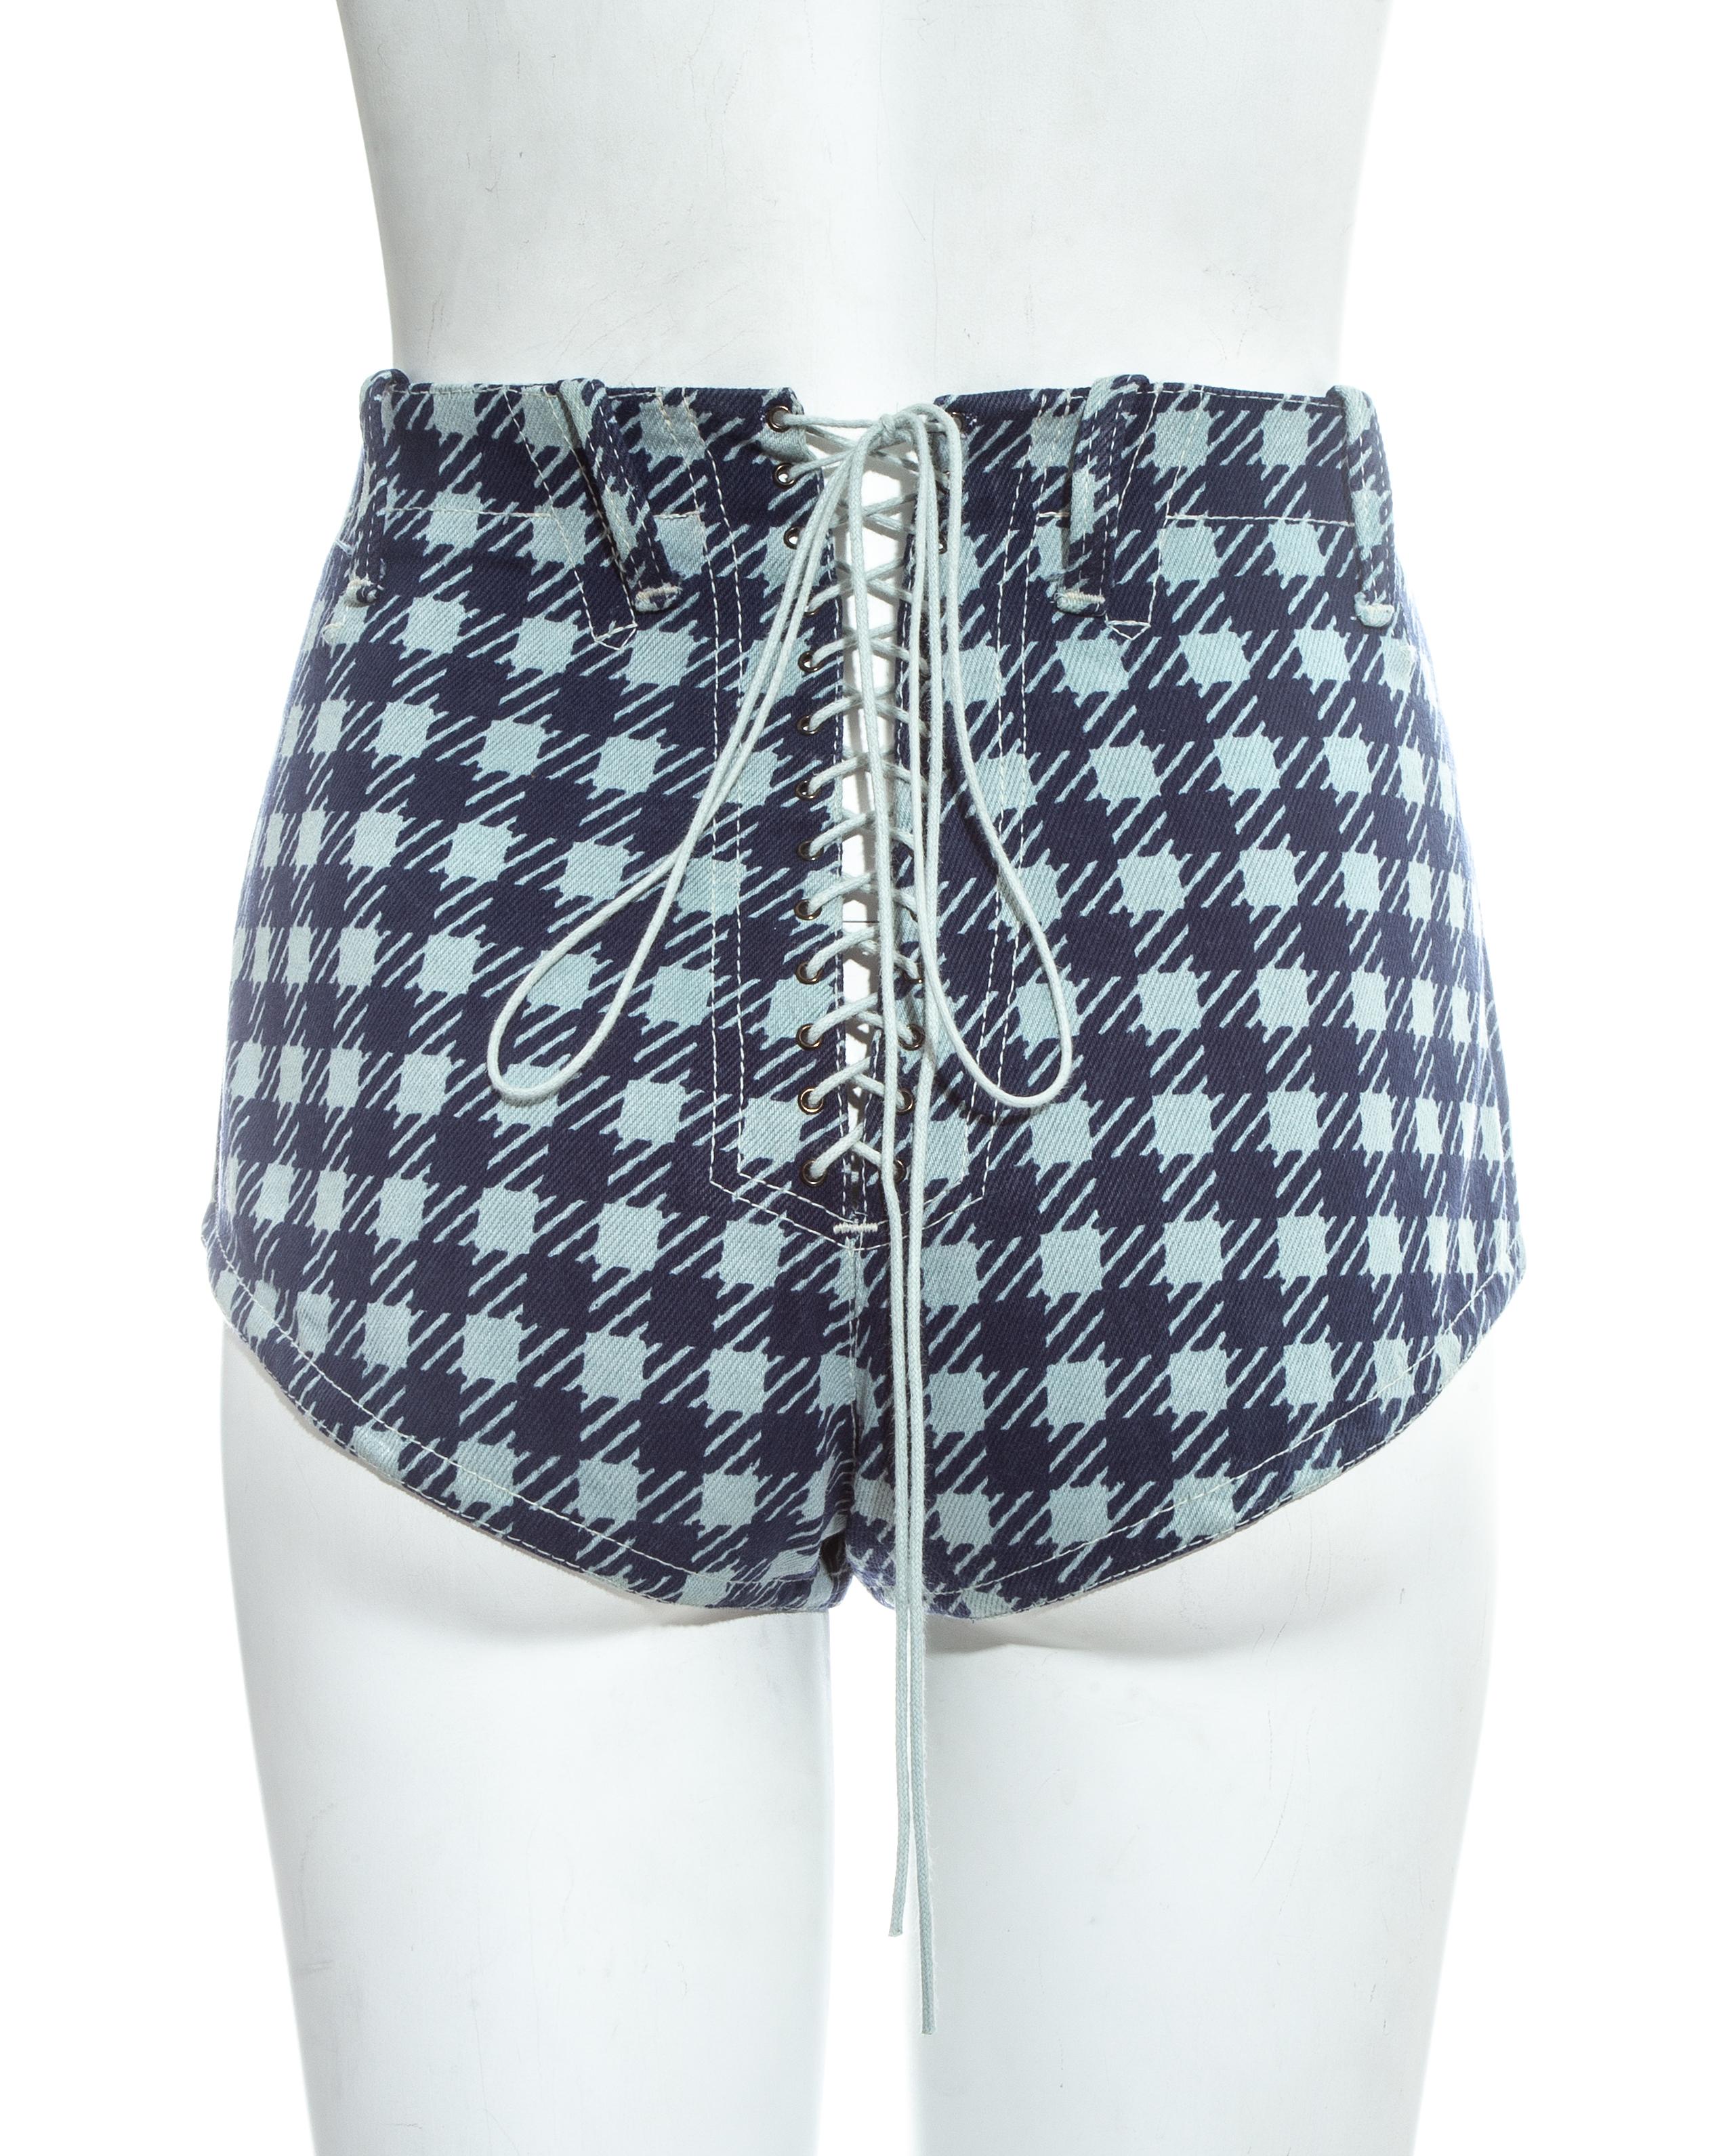 Azzedine Alaia navy blue houndstooth 'Tat' mini shorts with lace up fastening at rear. 

Spring-Summer 1991